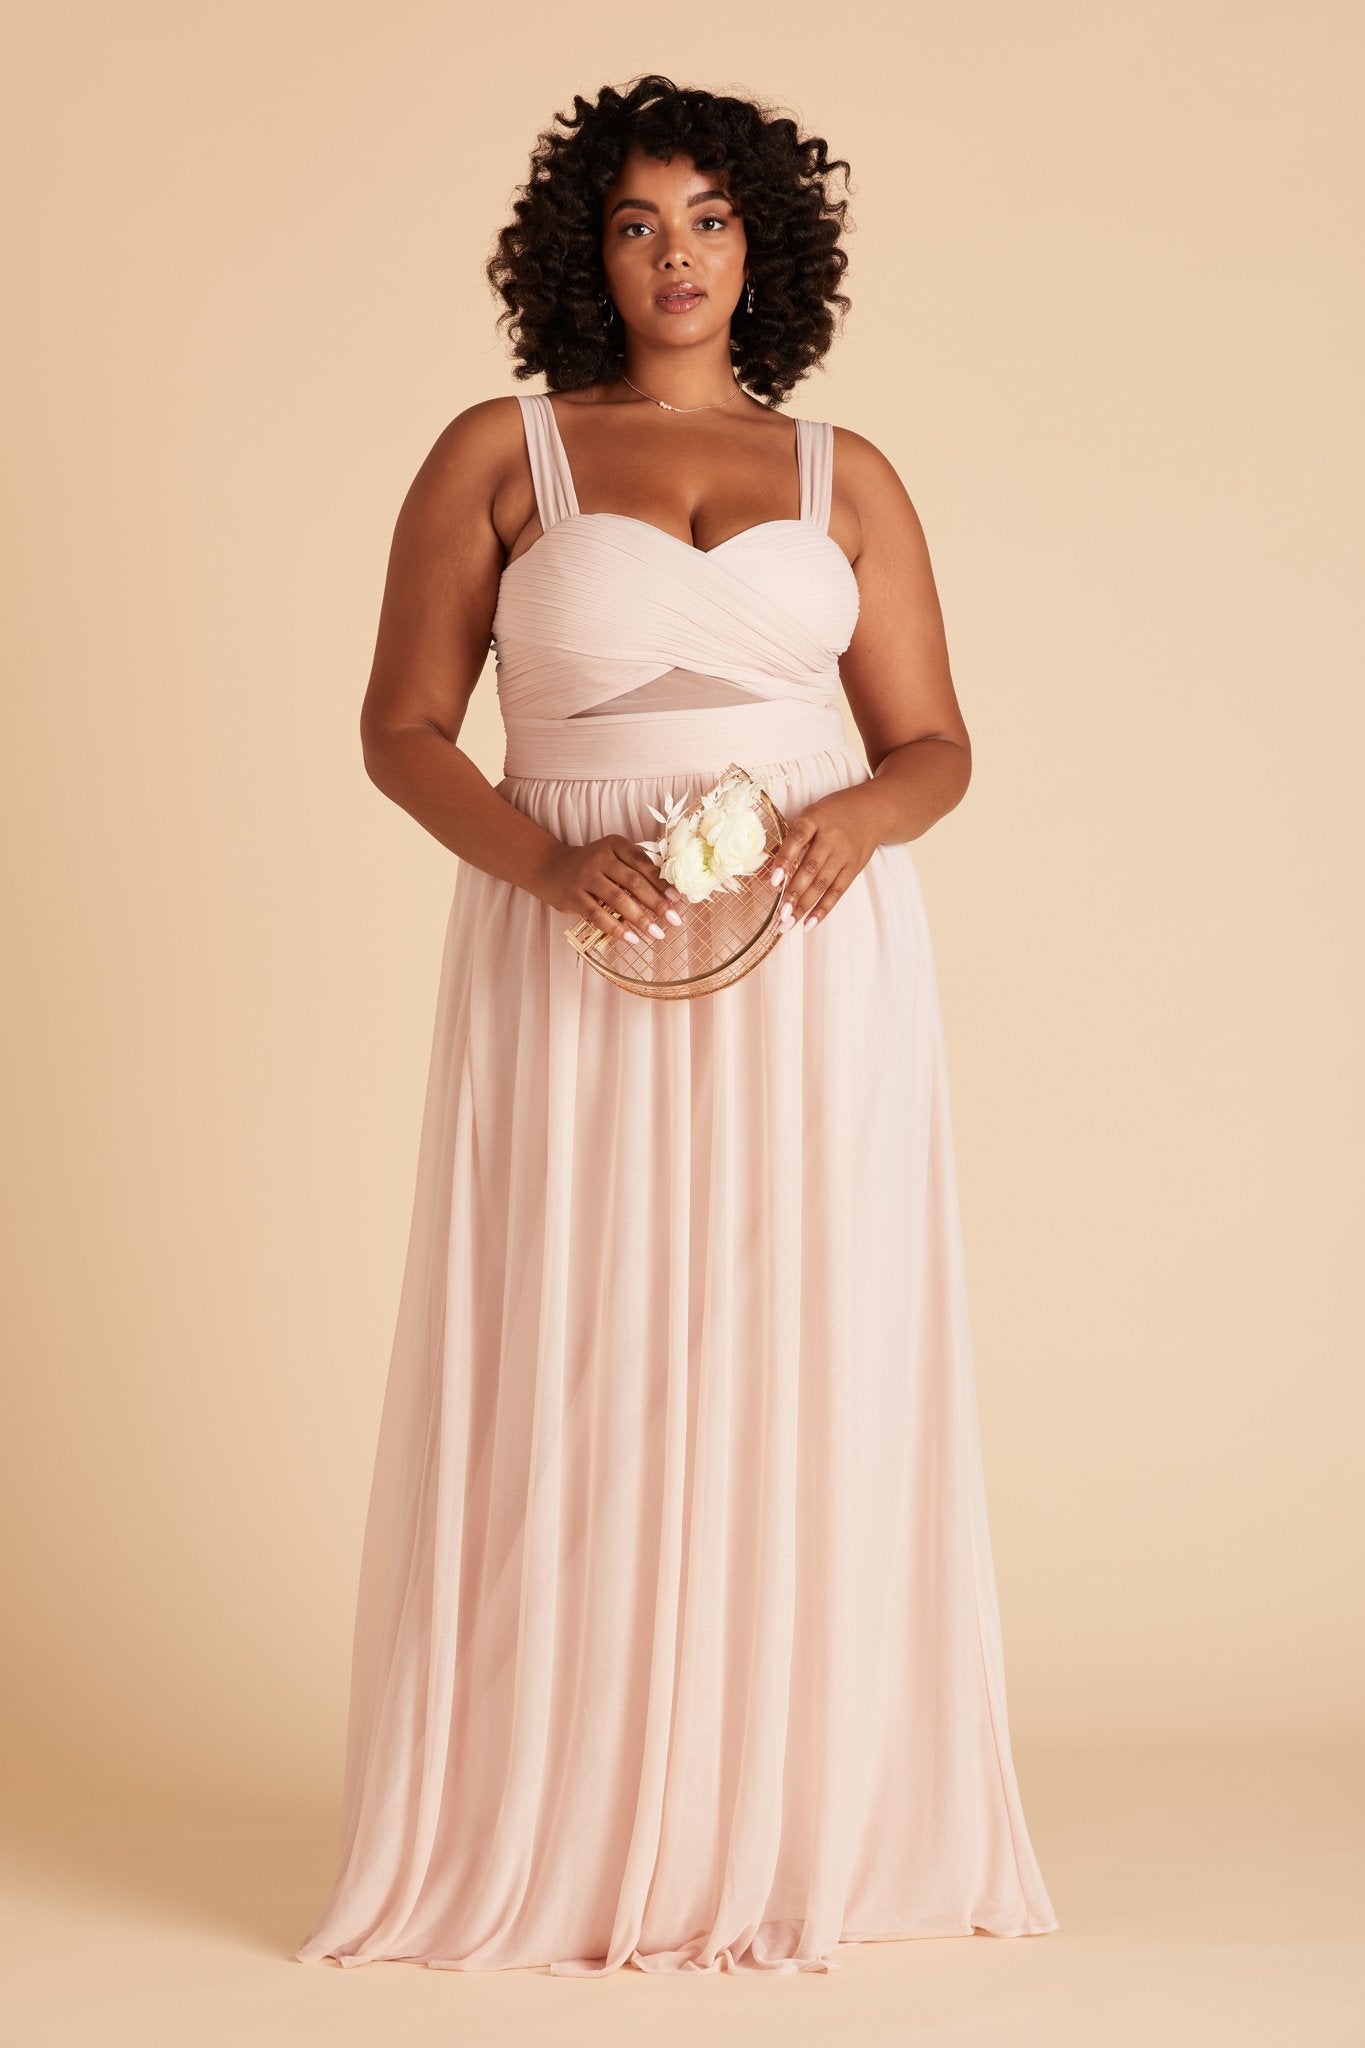 Elsye plus size bridesmaid dress in pale blush chiffon by Birdy Grey, front view